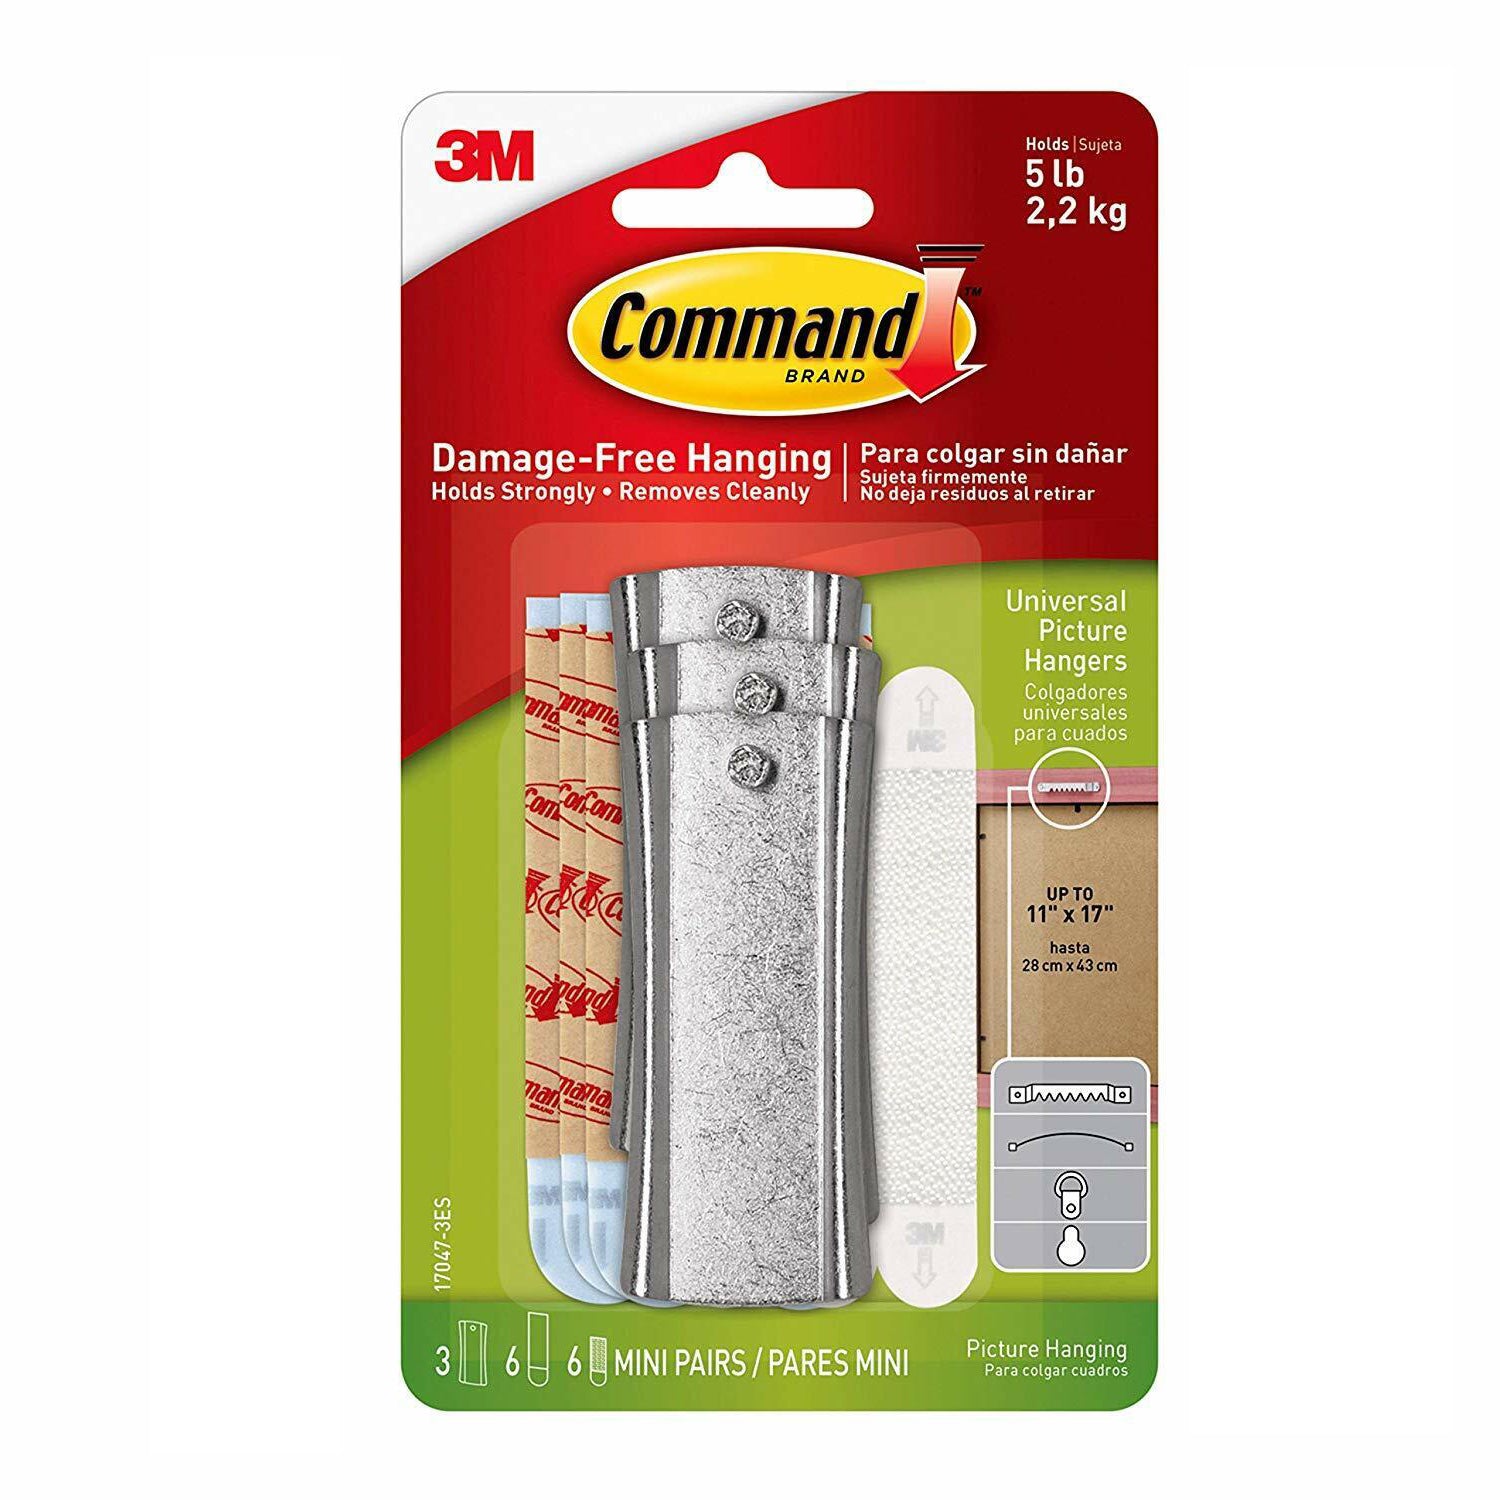 Command Universal Damage-Free Picture Hanging Metal Hangers With Stabilizing Strips – 5lb – Pack of 3